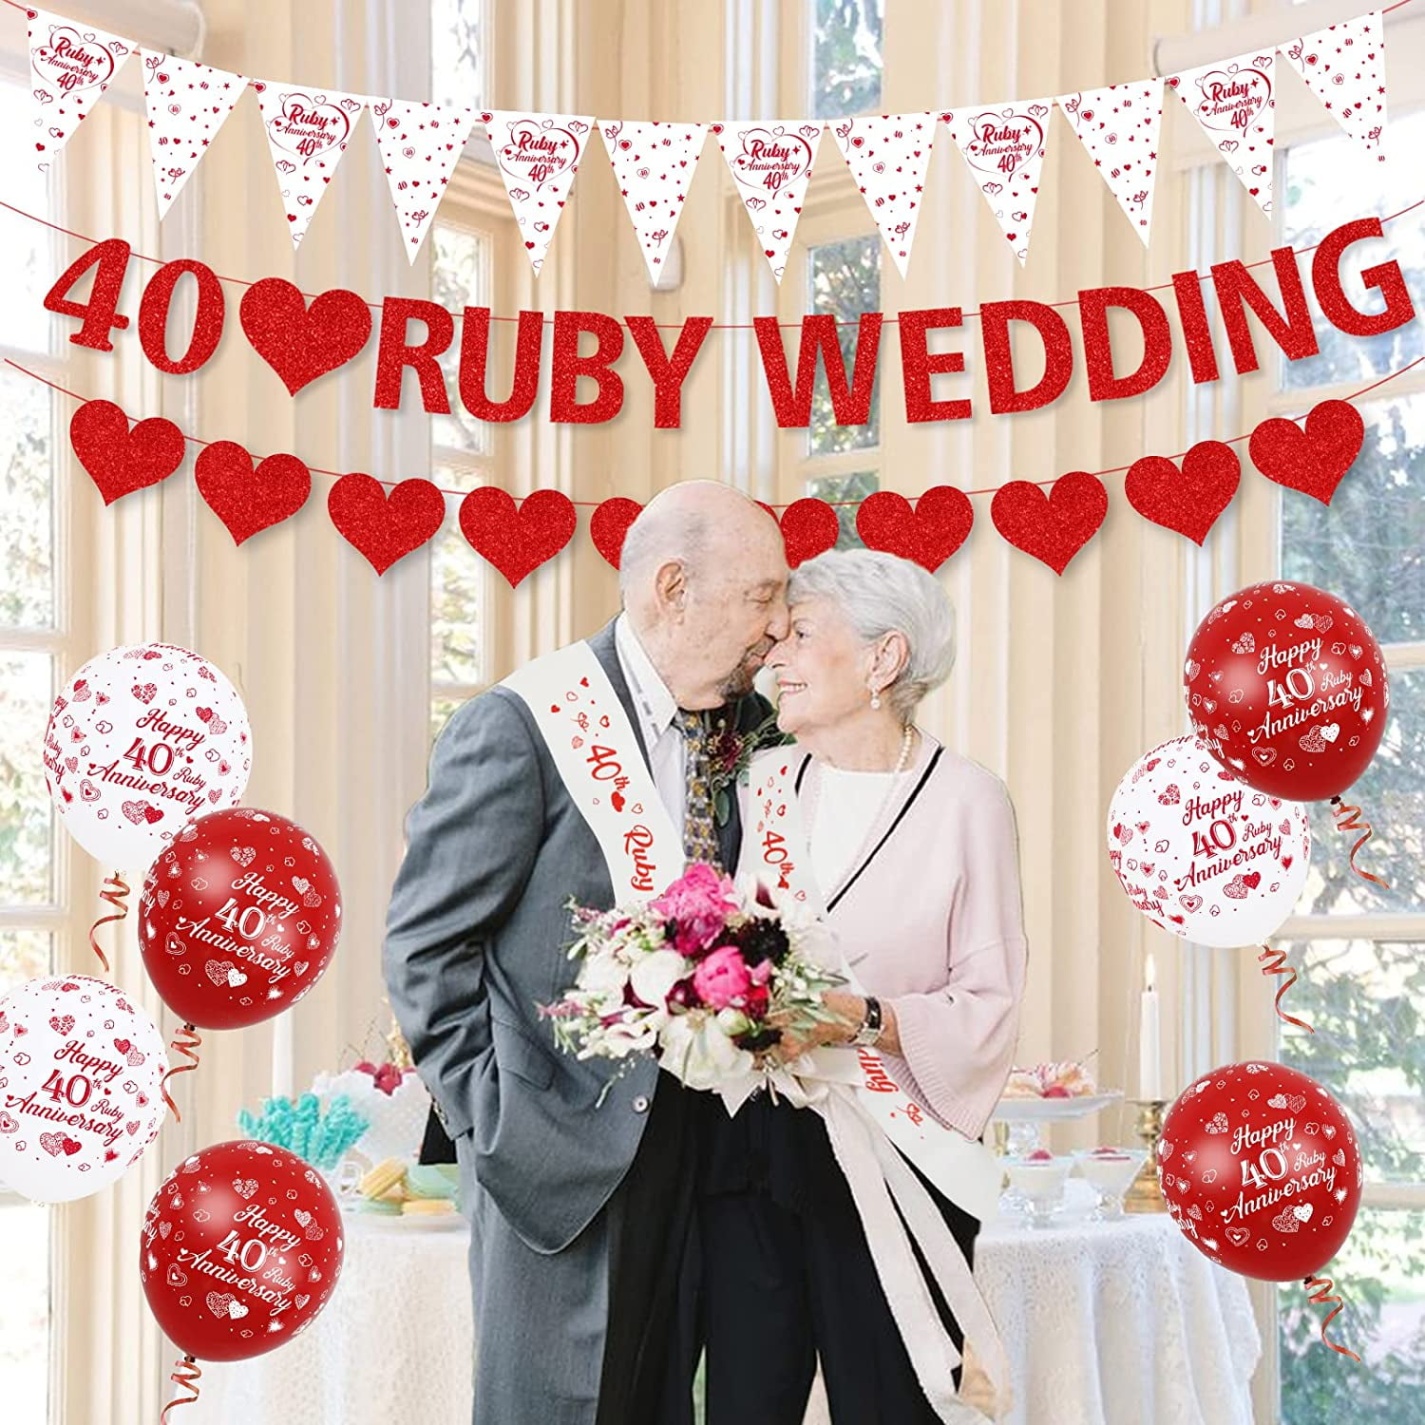 40th wedding anniversary decorations Bulan 1 th Wedding Anniversary Decorations Ruby th Anniversary Balloons Bunting  Red Heart Rings Cake Topper Satin Sash for th Couple Anniversary Party